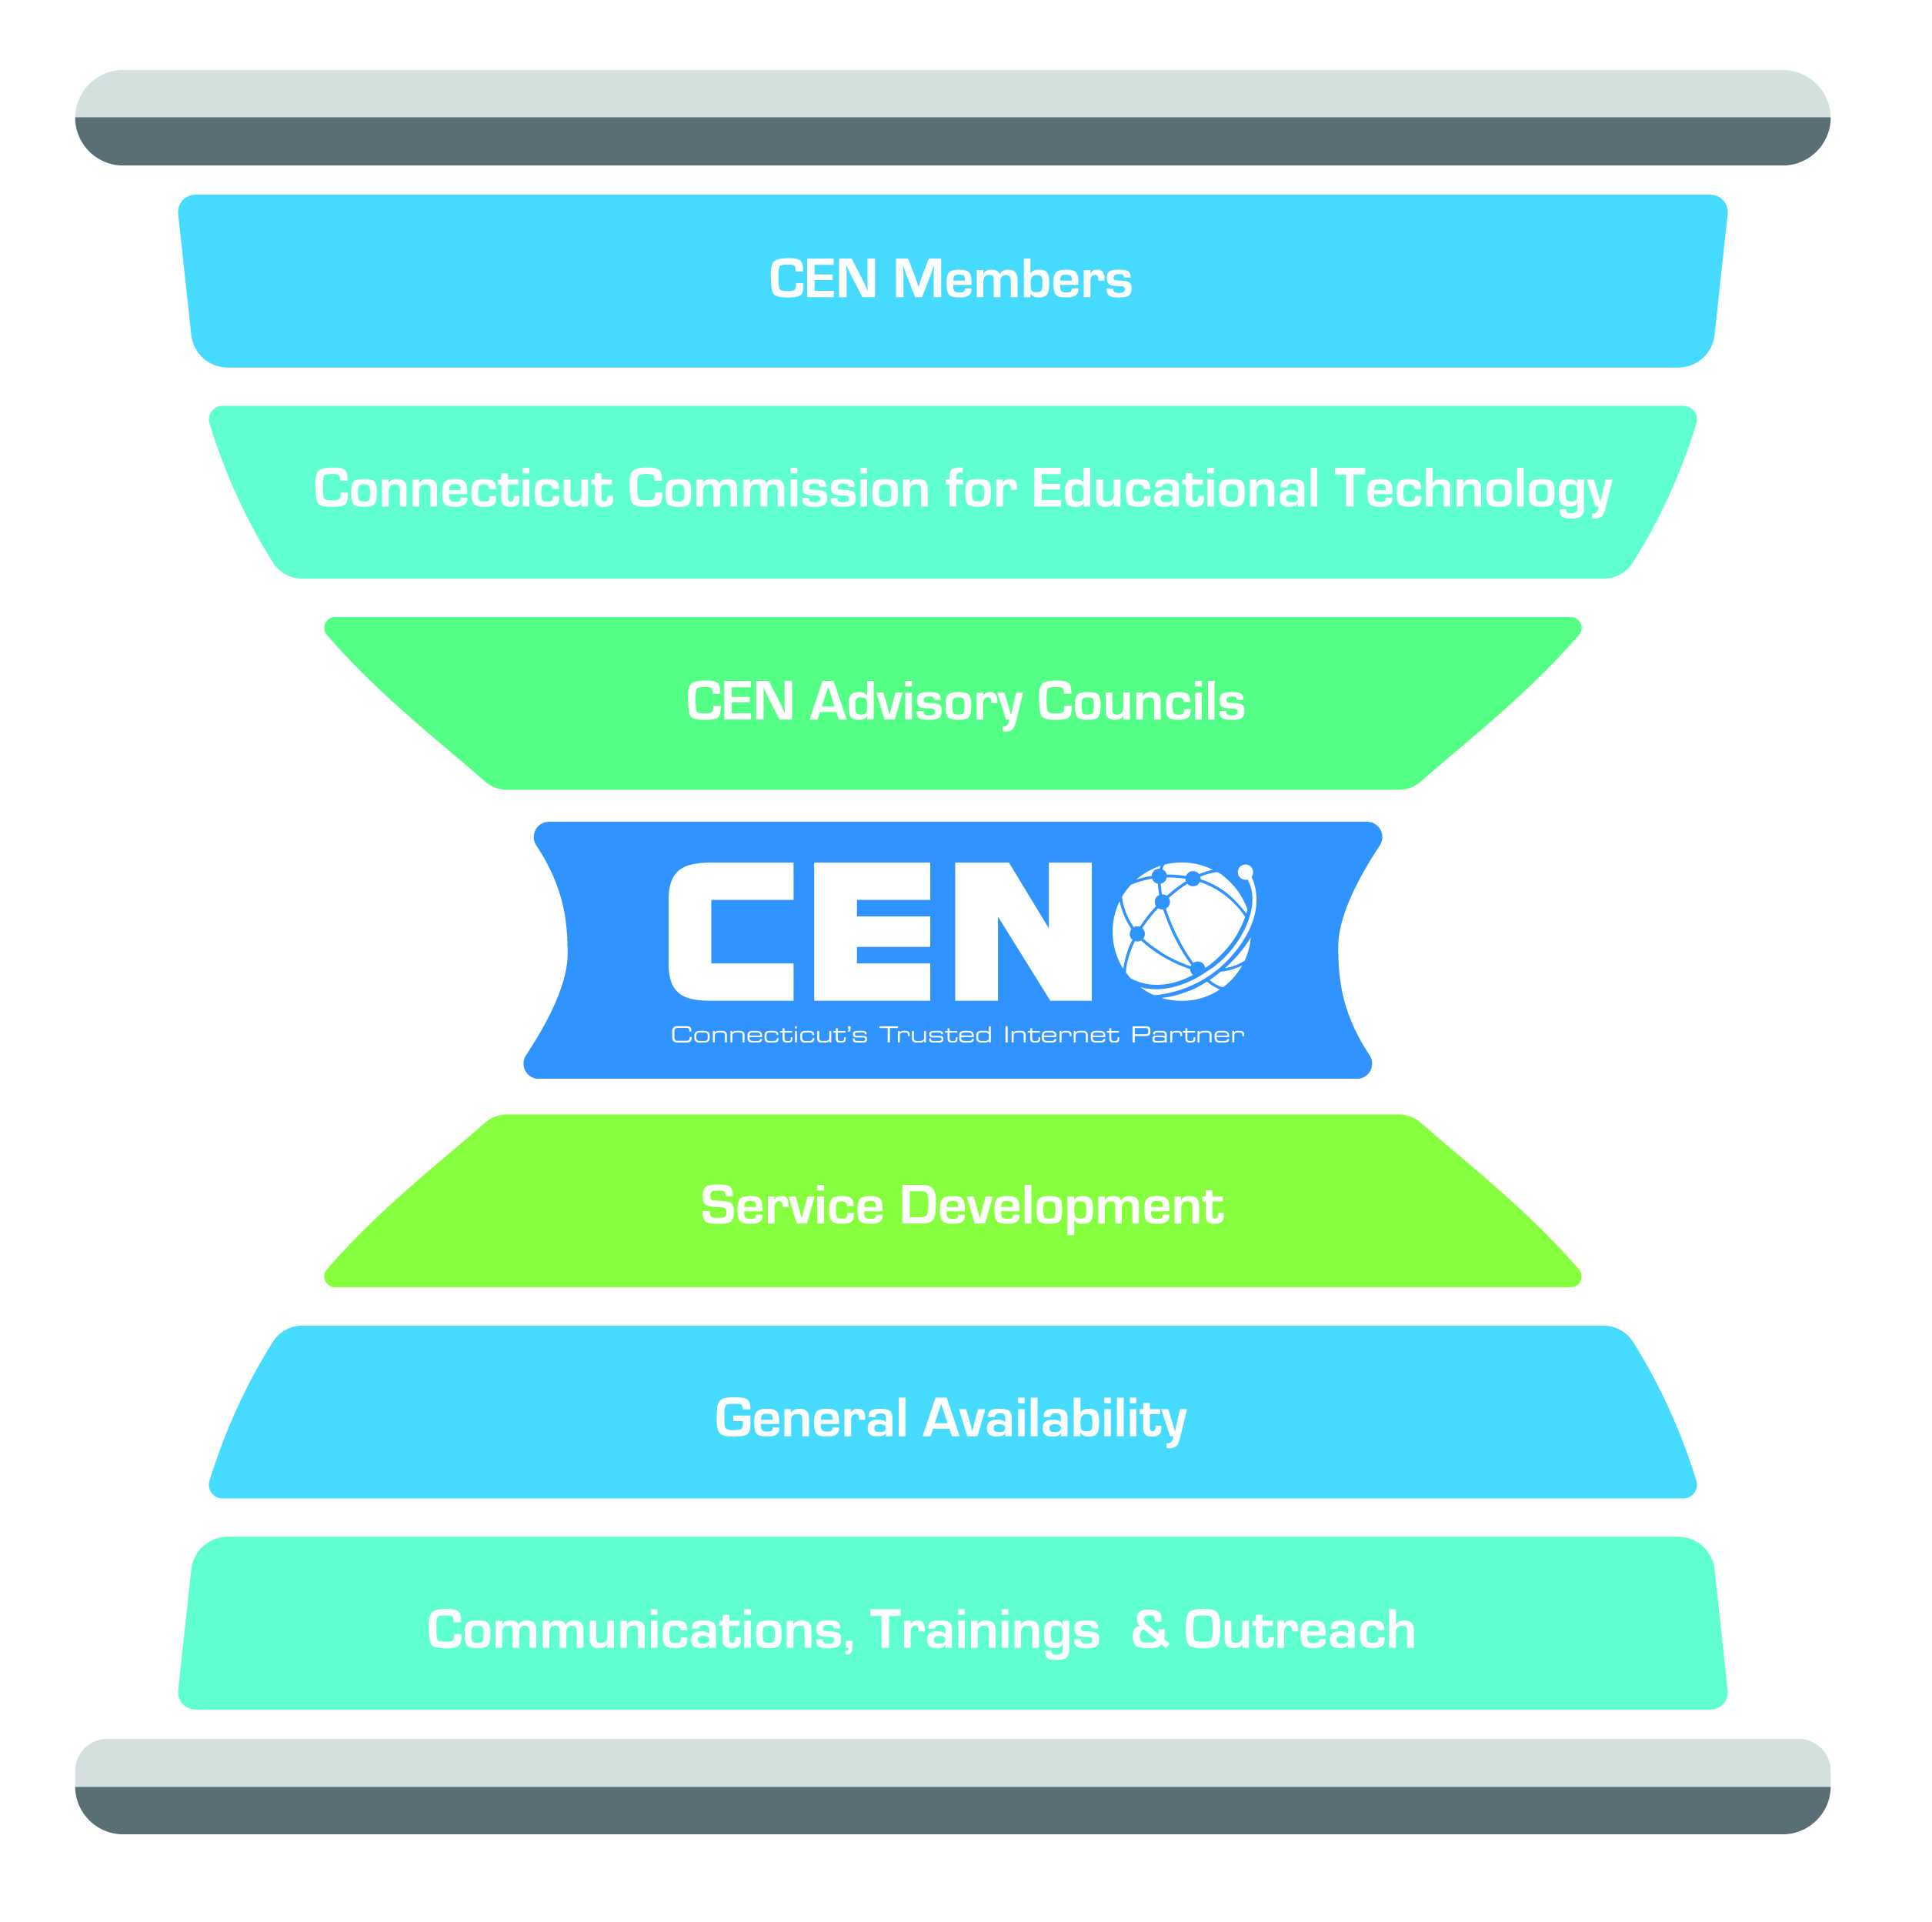 Hourglass made up of bars that read: CEN Members, Connecticut Commission for Educational Technology, CEN Advisory Councils, Service Development, General Availability, and Communications, Training & Outreach